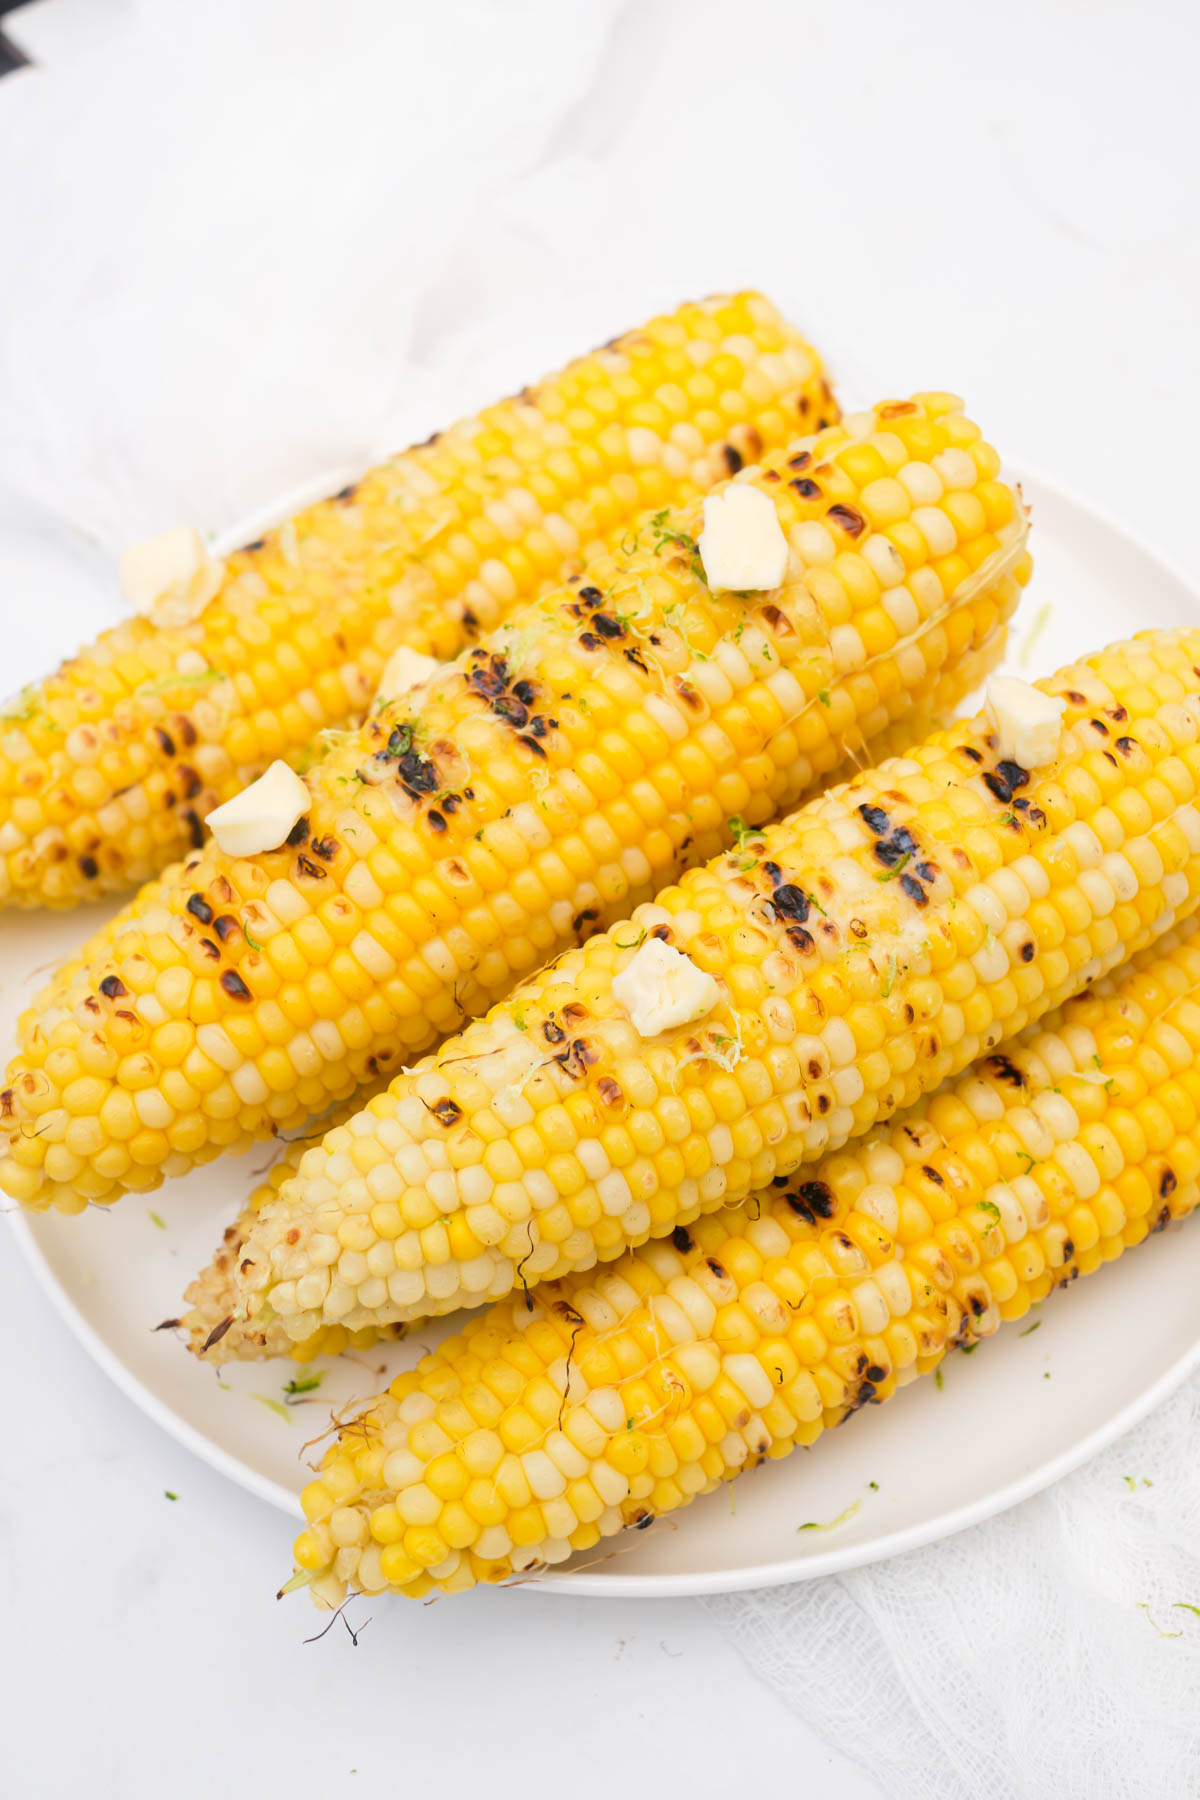 5 pieces of grilled corn topped with butter and stacked on a white plate